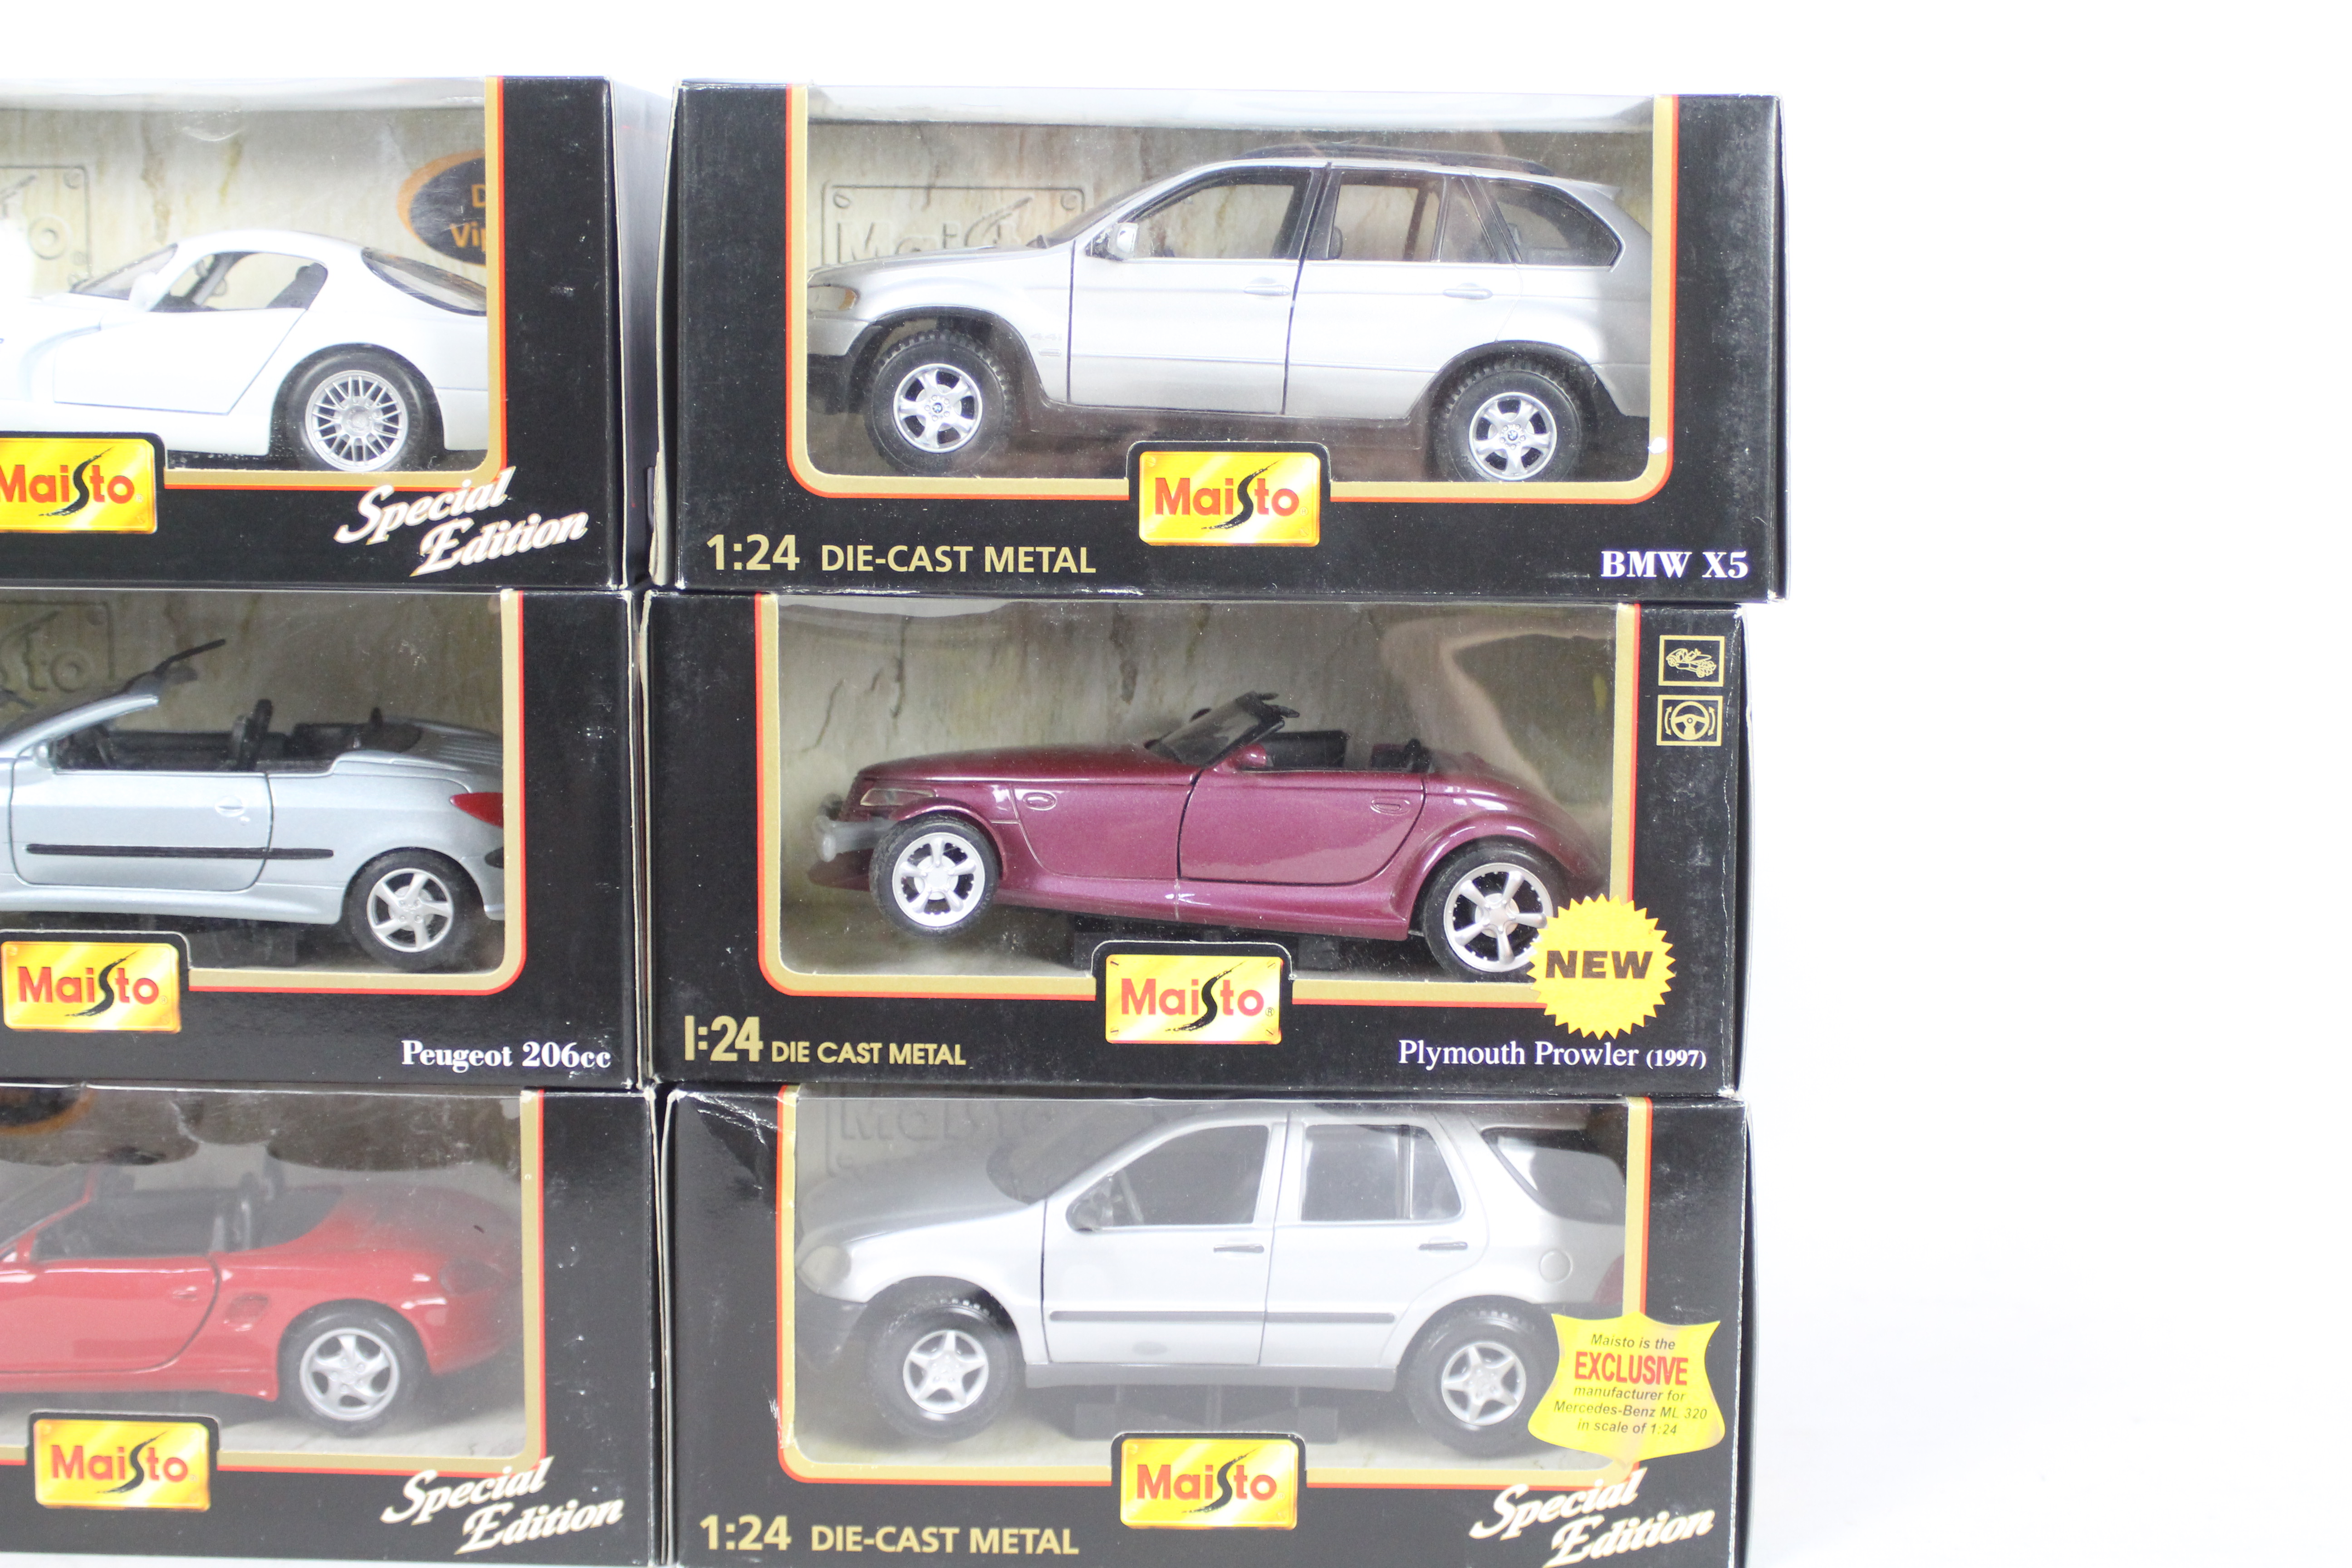 Maisto - 6 x boxed 1:24 scale models featuring BMW X5 - Plymouth Prowler 1997 - Special Edition - Image 2 of 3